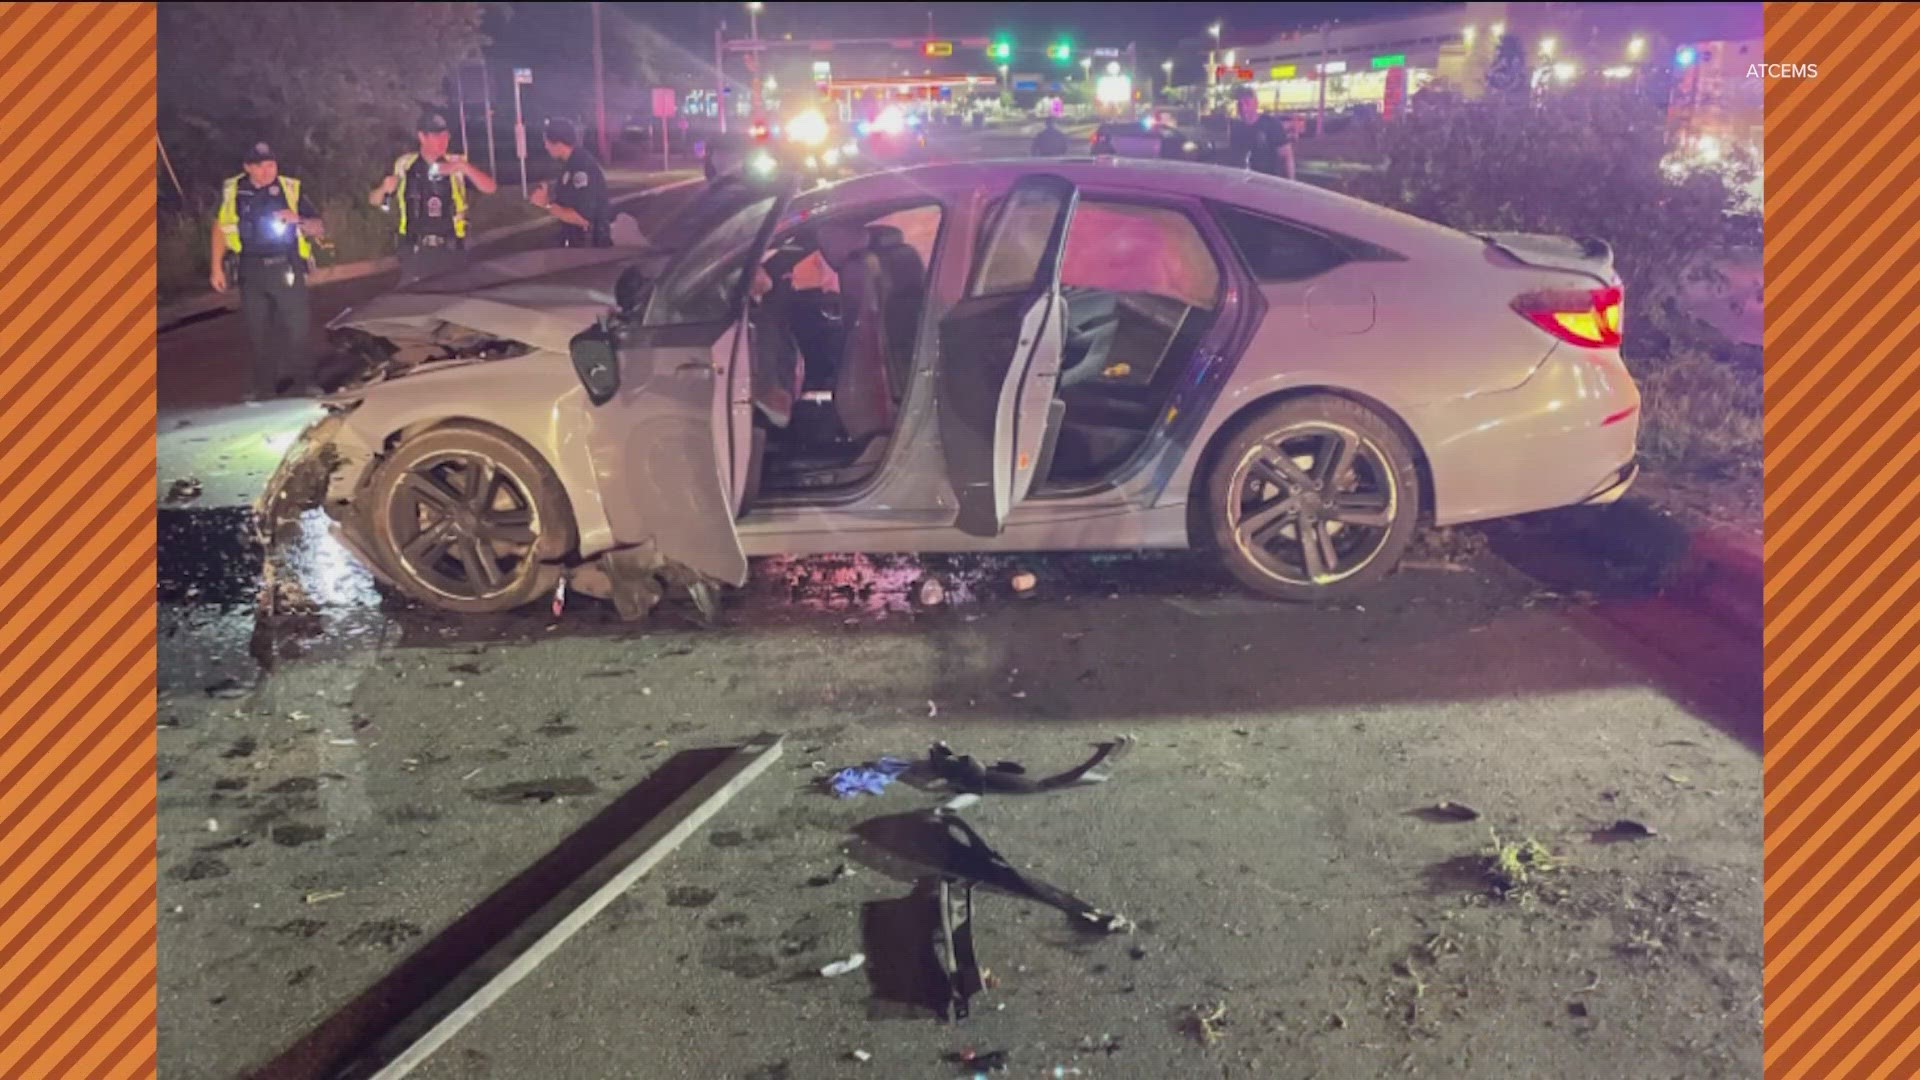 At least six people are injured after a three-car crash early Saturday morning.